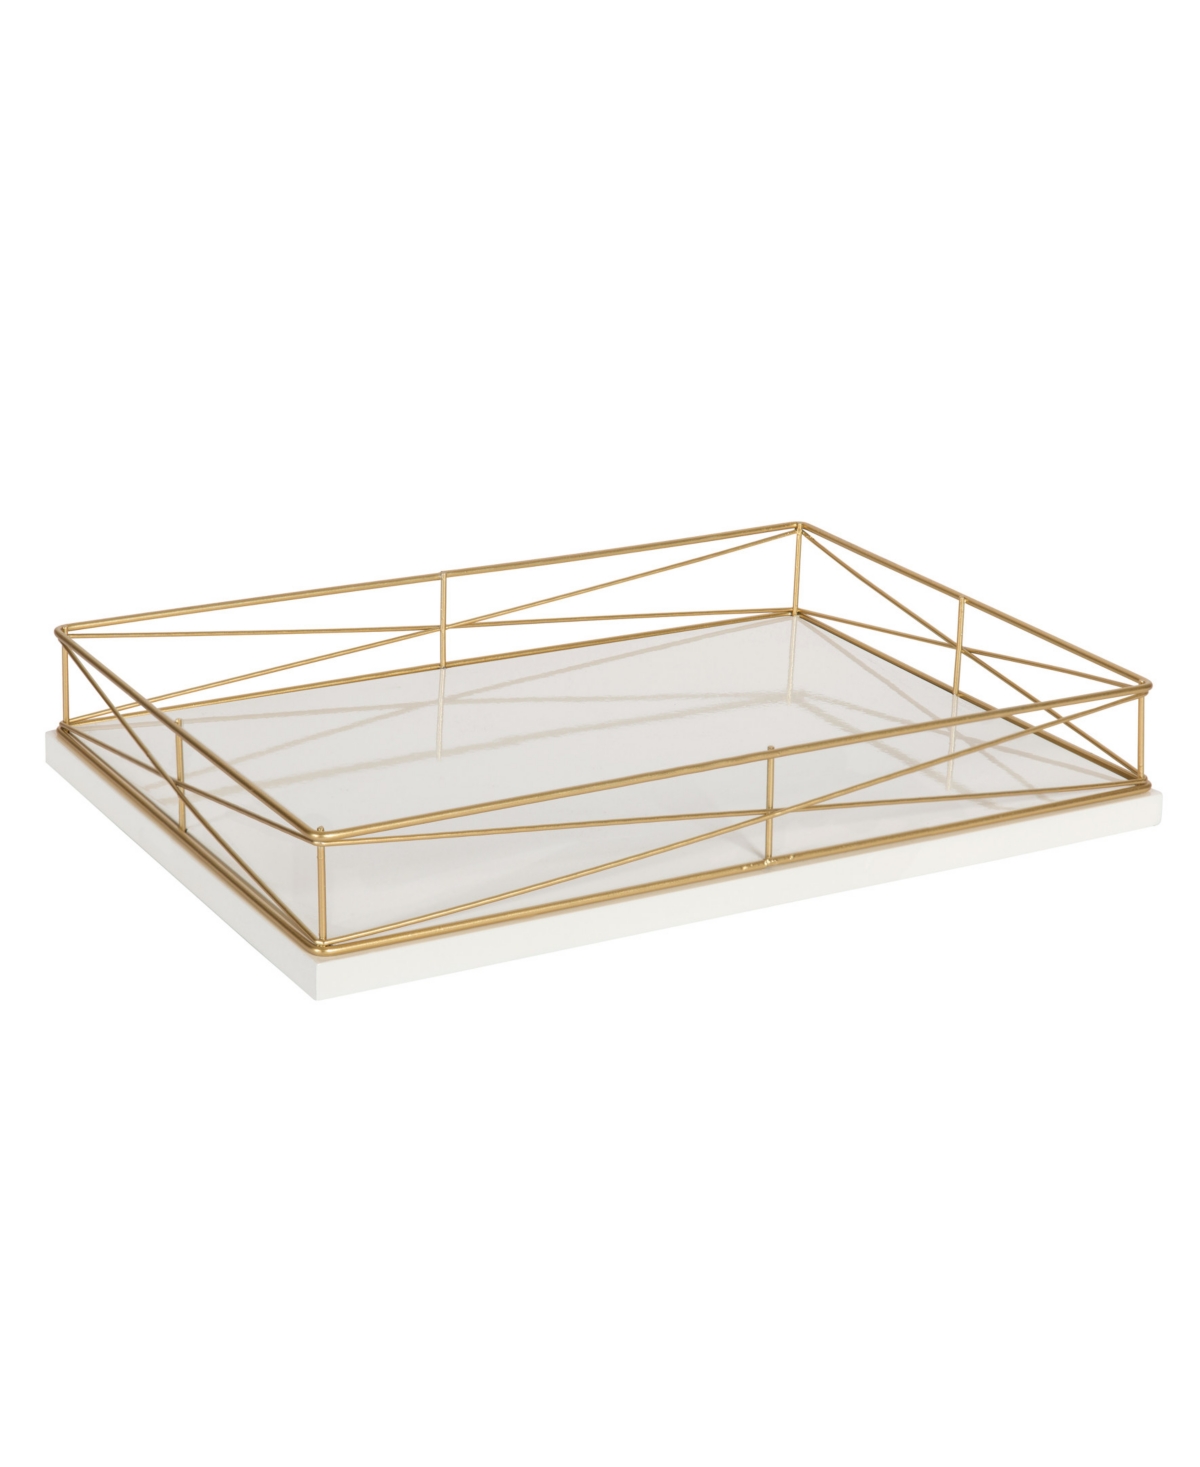 Kate And Laurel Mendel Rectangle Tray With Decorative Metal Rim In White